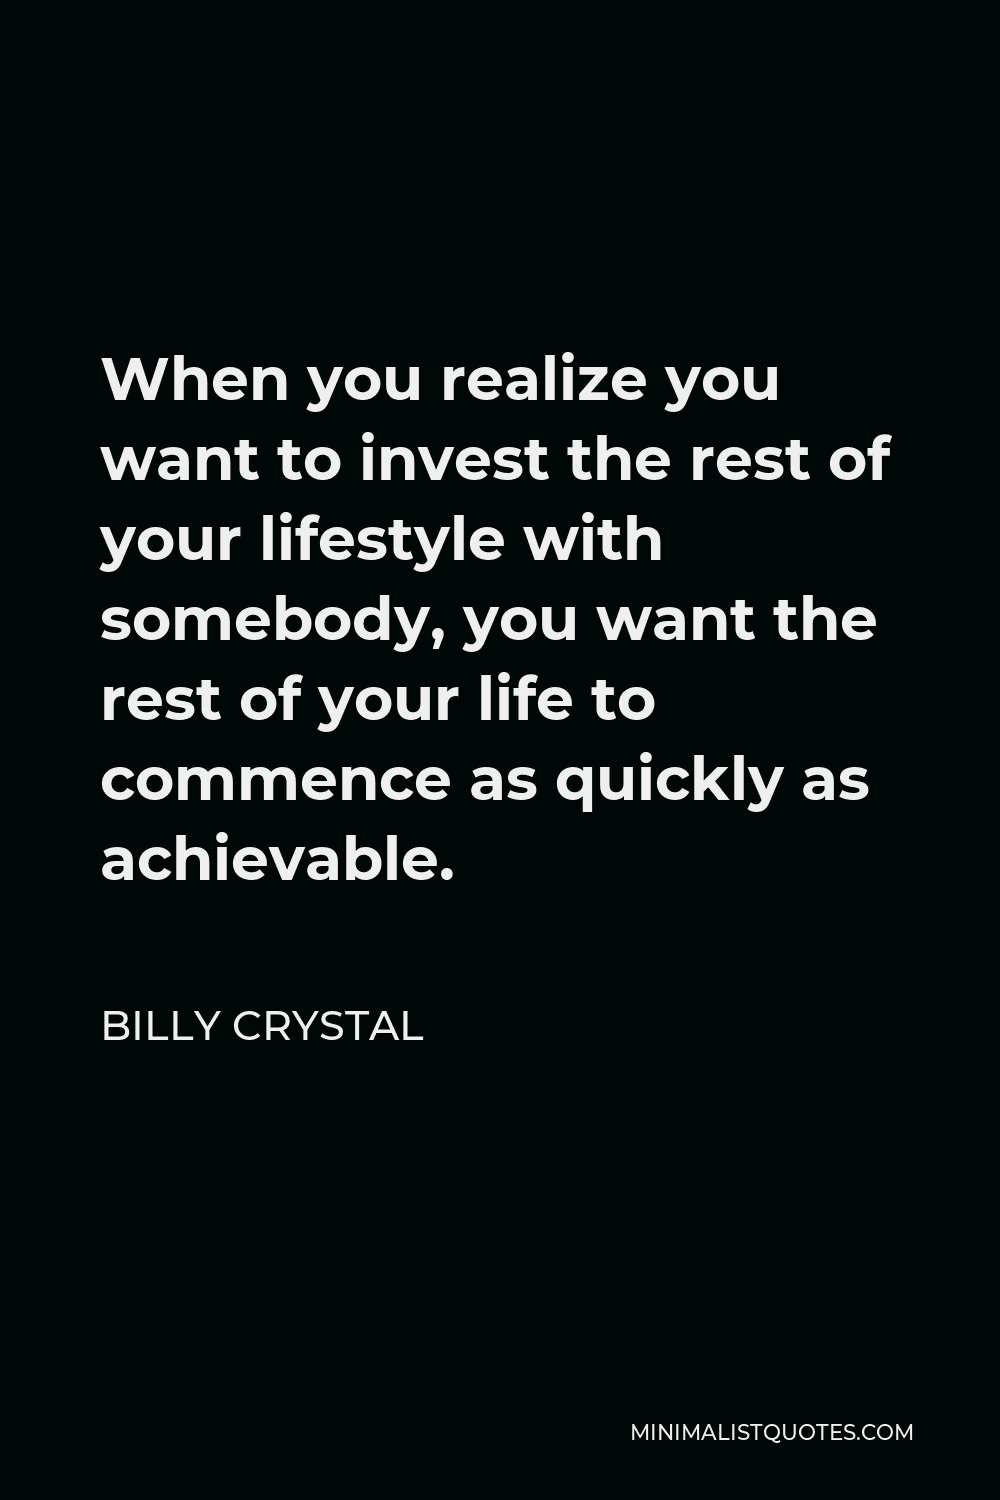 Billy Crystal Quote - When you realize you want to invest the rest of your lifestyle with somebody, you want the rest of your life to commence as quickly as achievable.